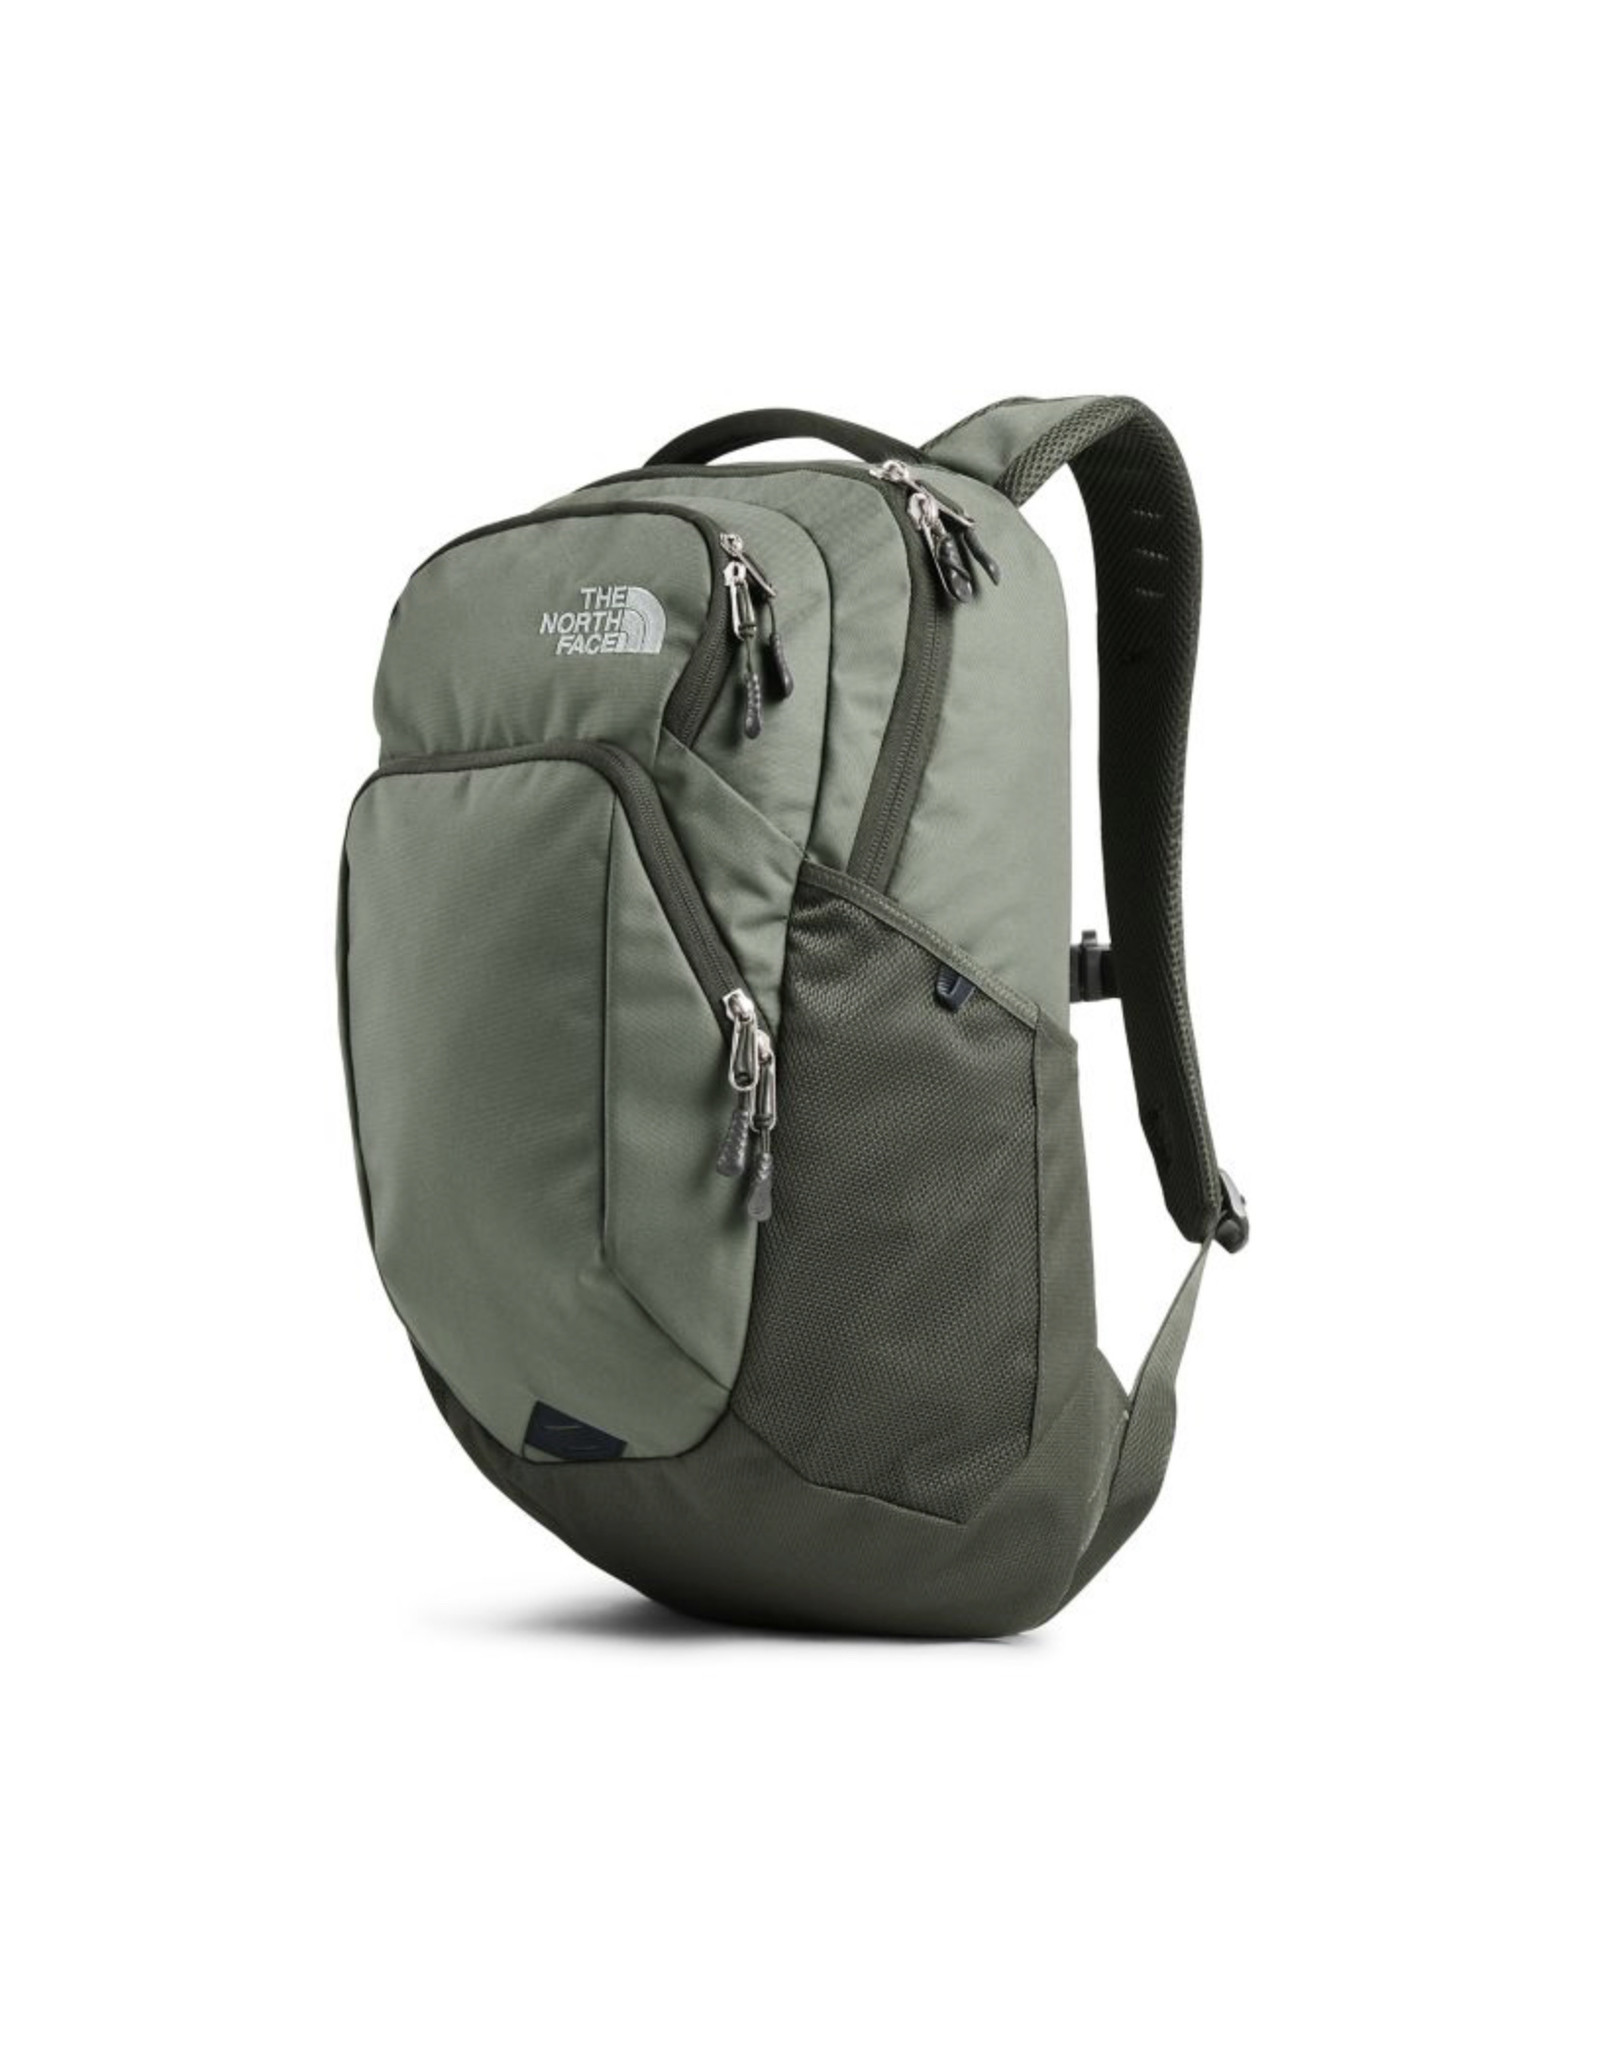 THE NORTH FACE PIVOTER DAYPACK